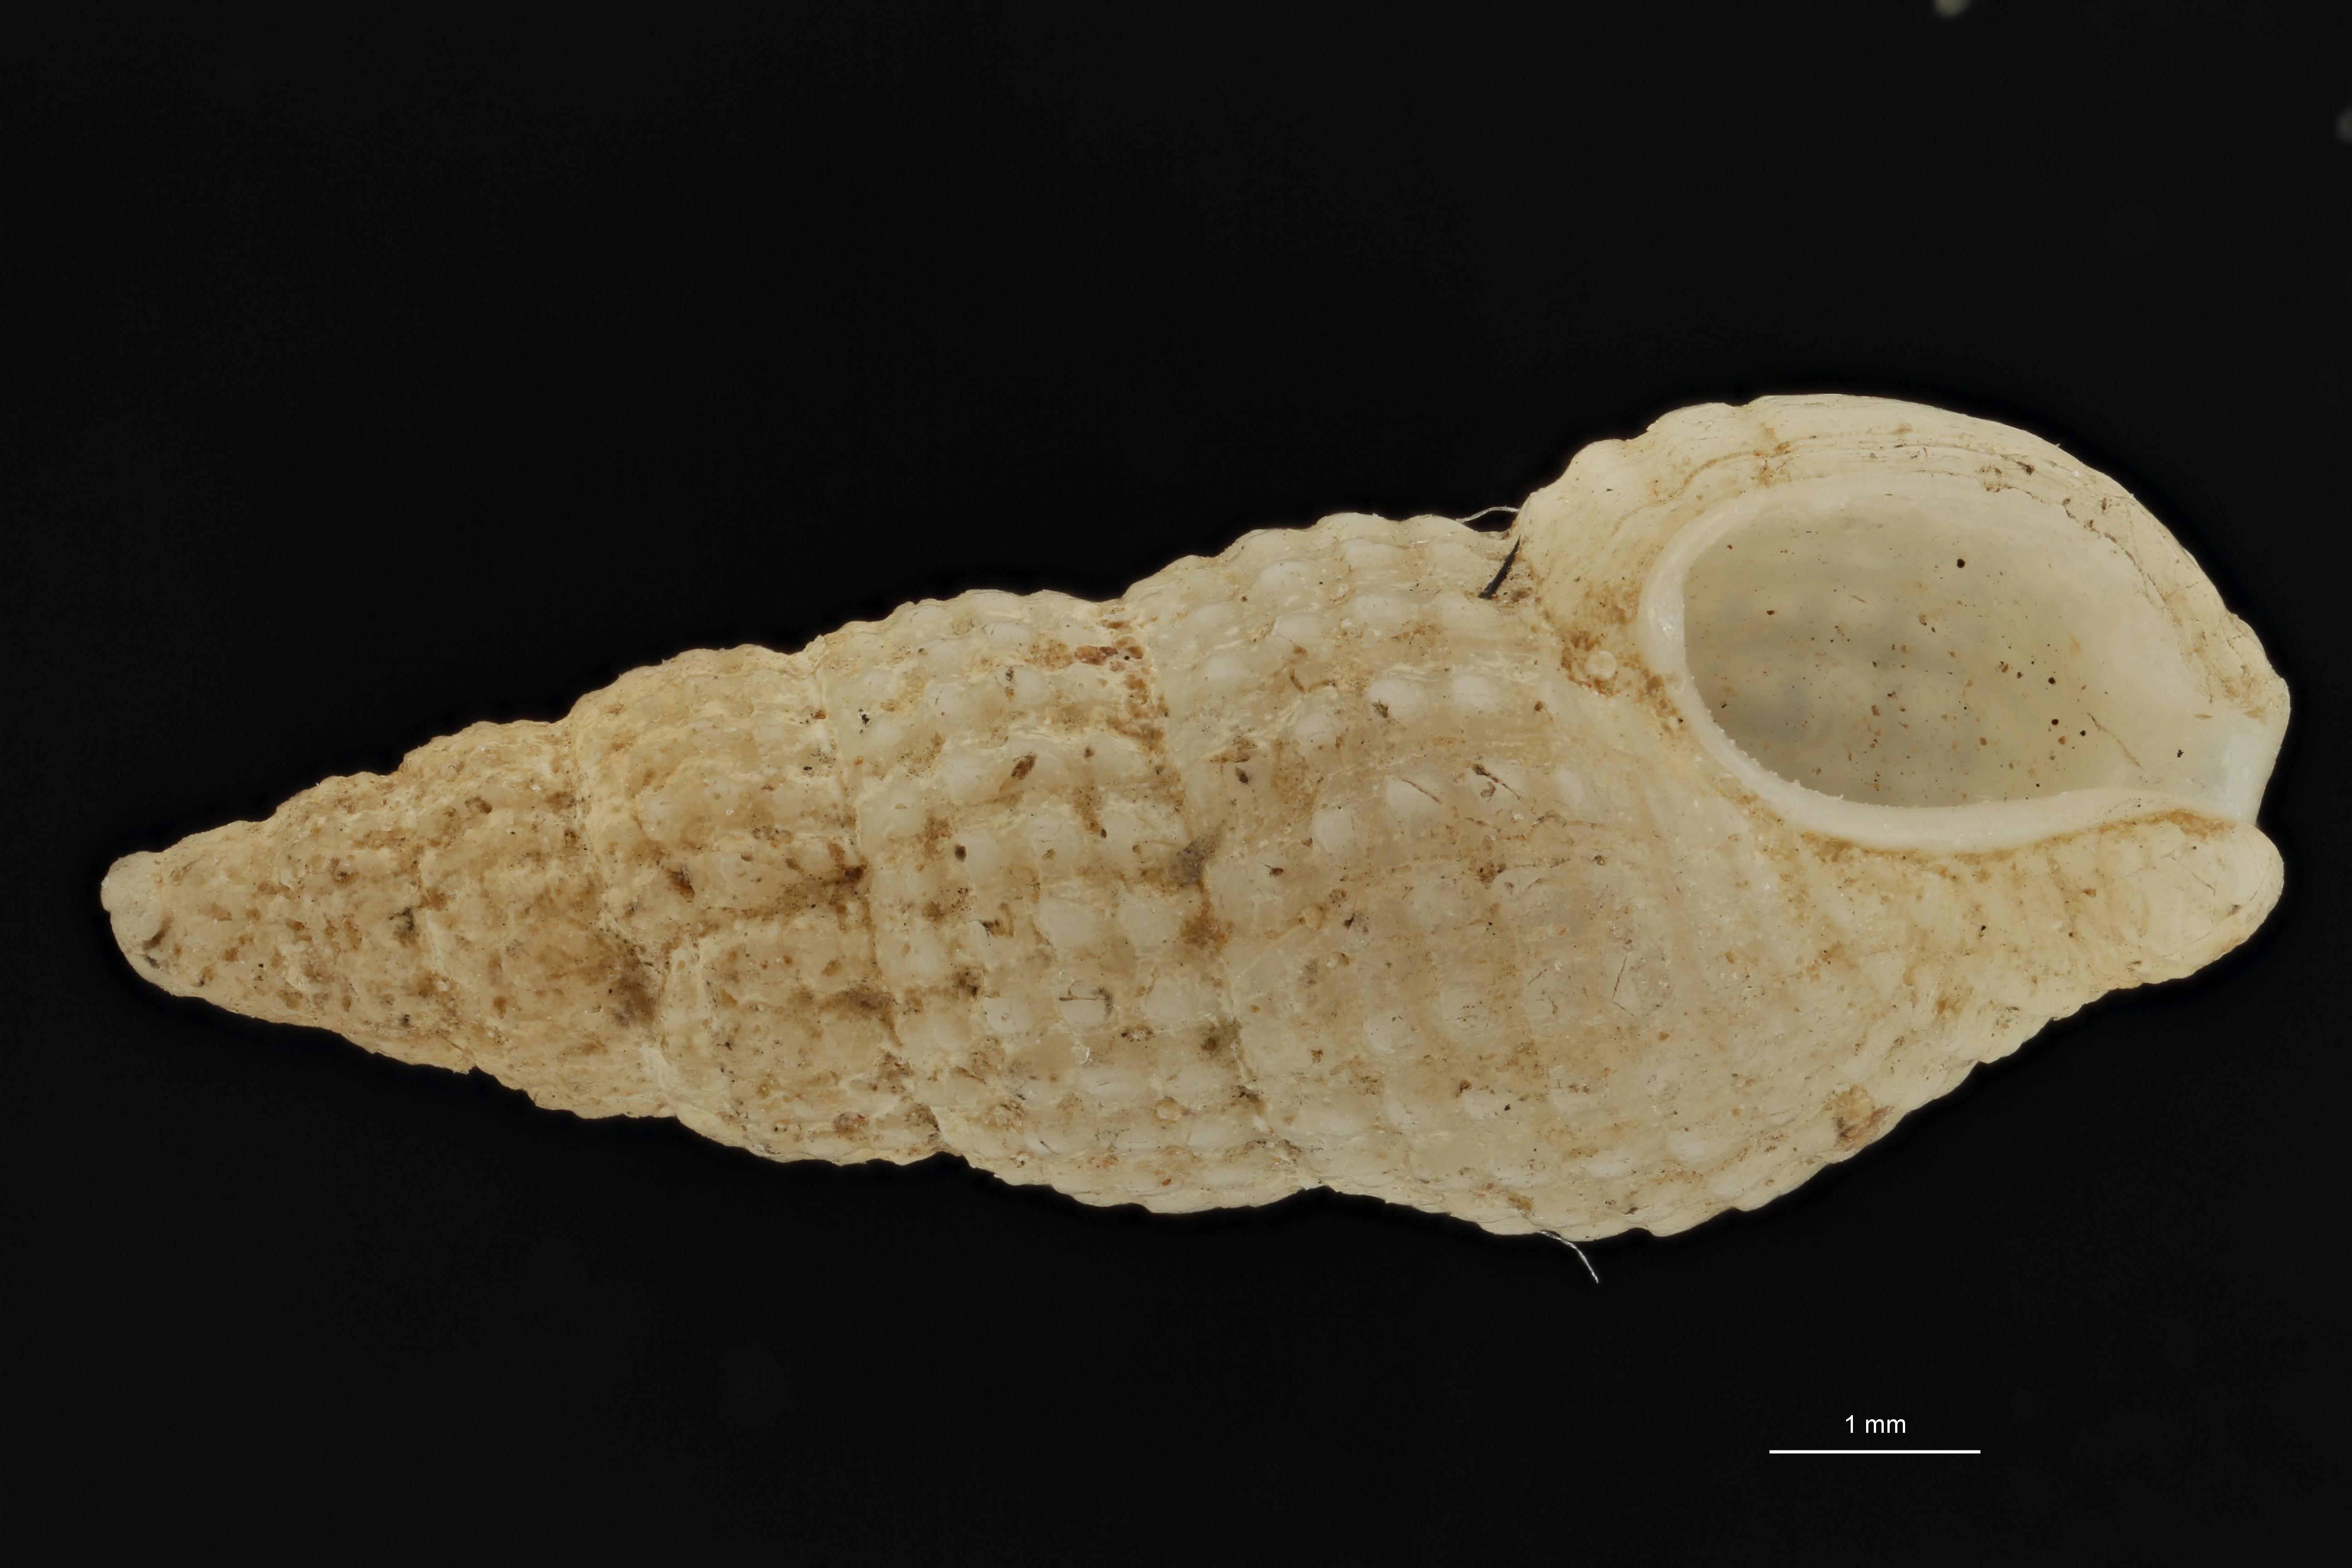 BE-RBINS-INV TYPE MT 613 Donovania candissima var. tenuisculpta VENTRAL ZS PMax Scaled.jpg